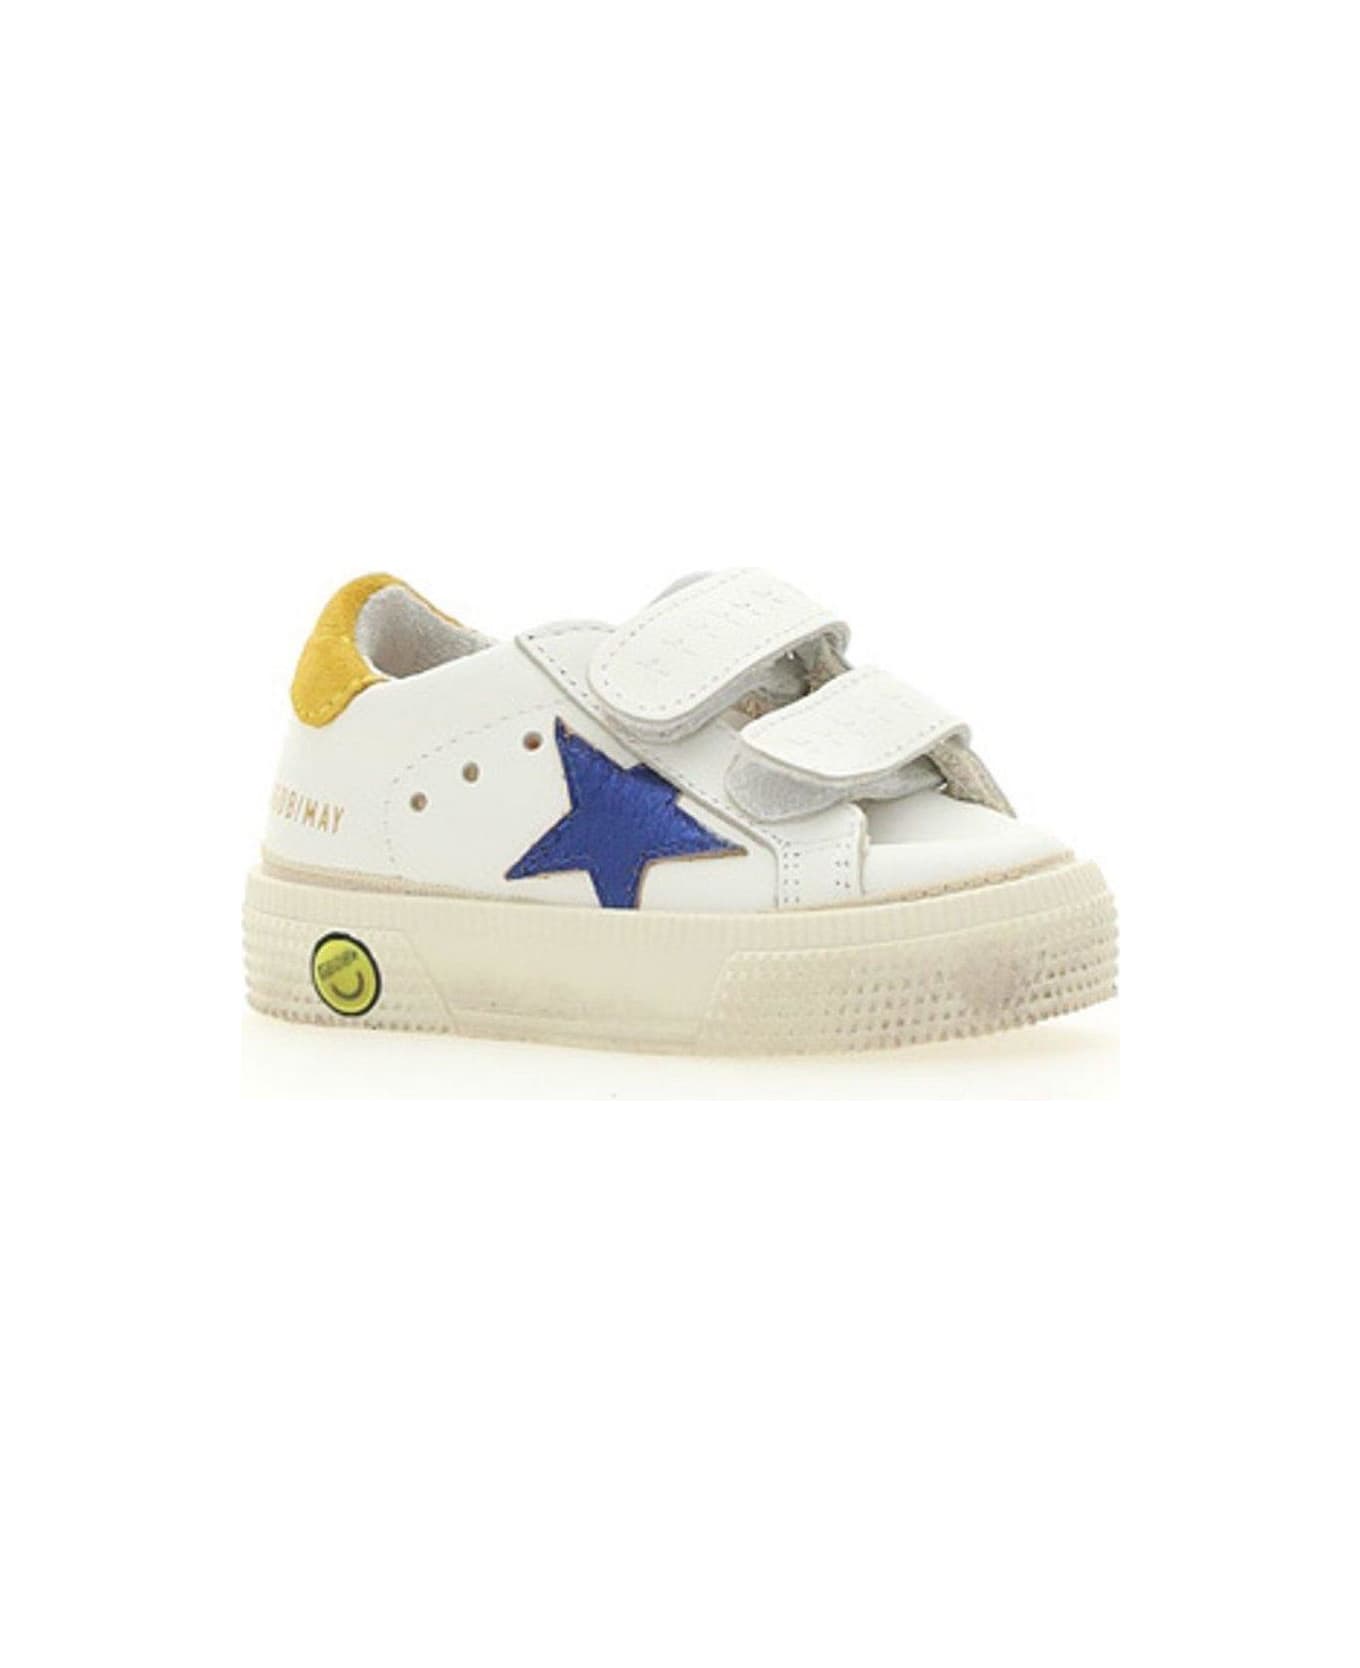 Golden Goose Super Star Touch-strap Sneakers - White/blue/mustard